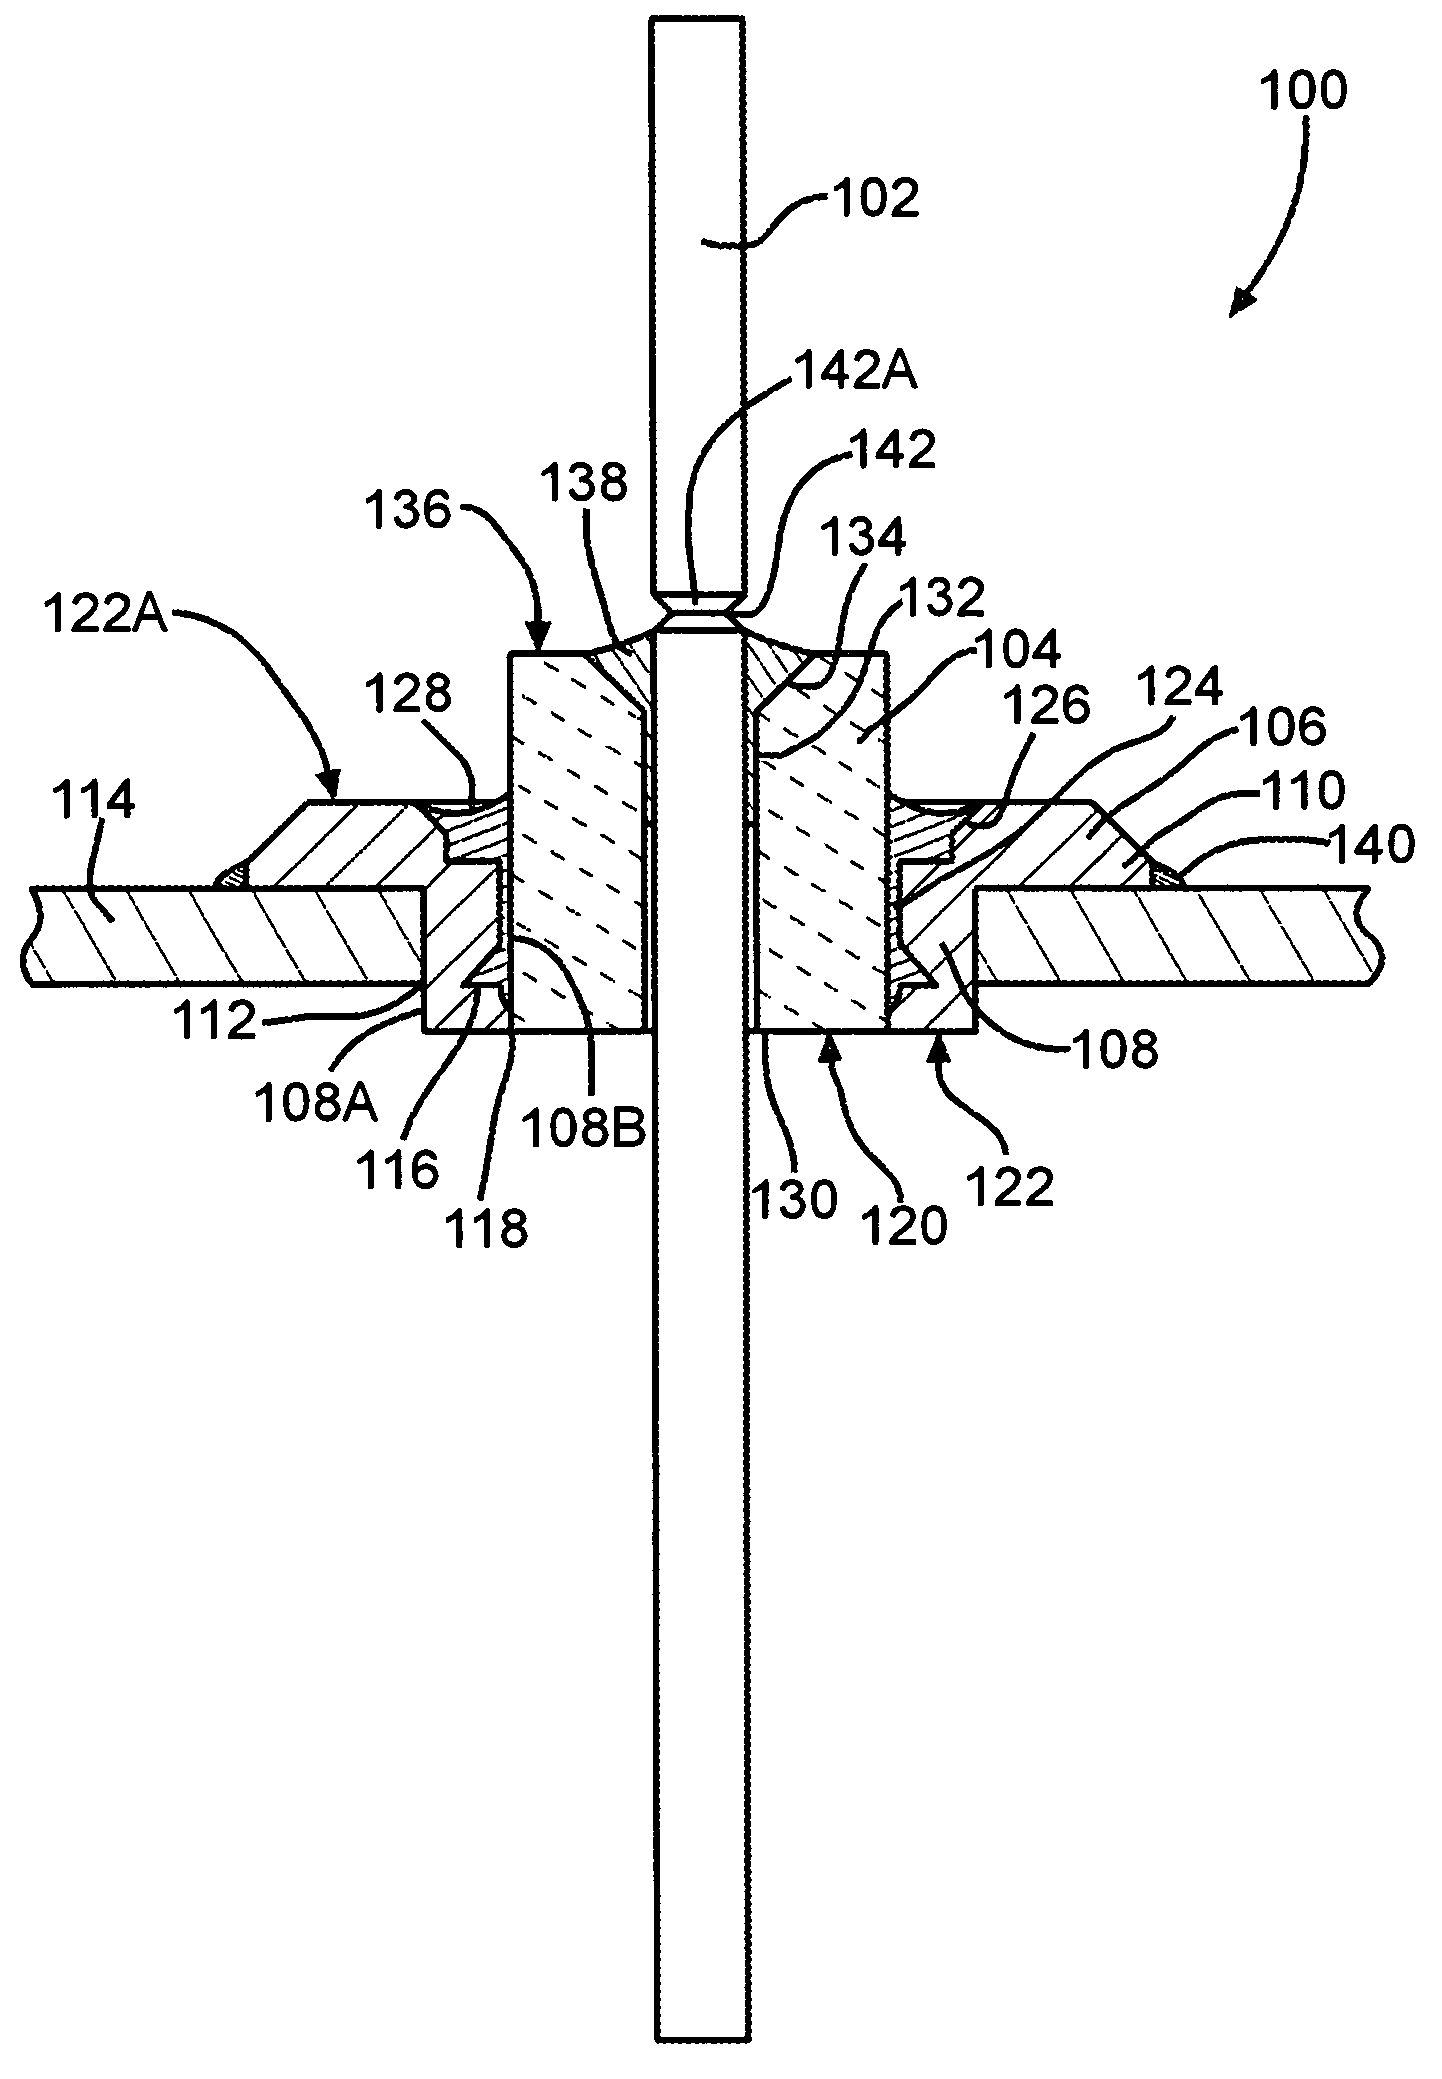 Method for minimizing stress in feedthrough capacitor filter assemblies